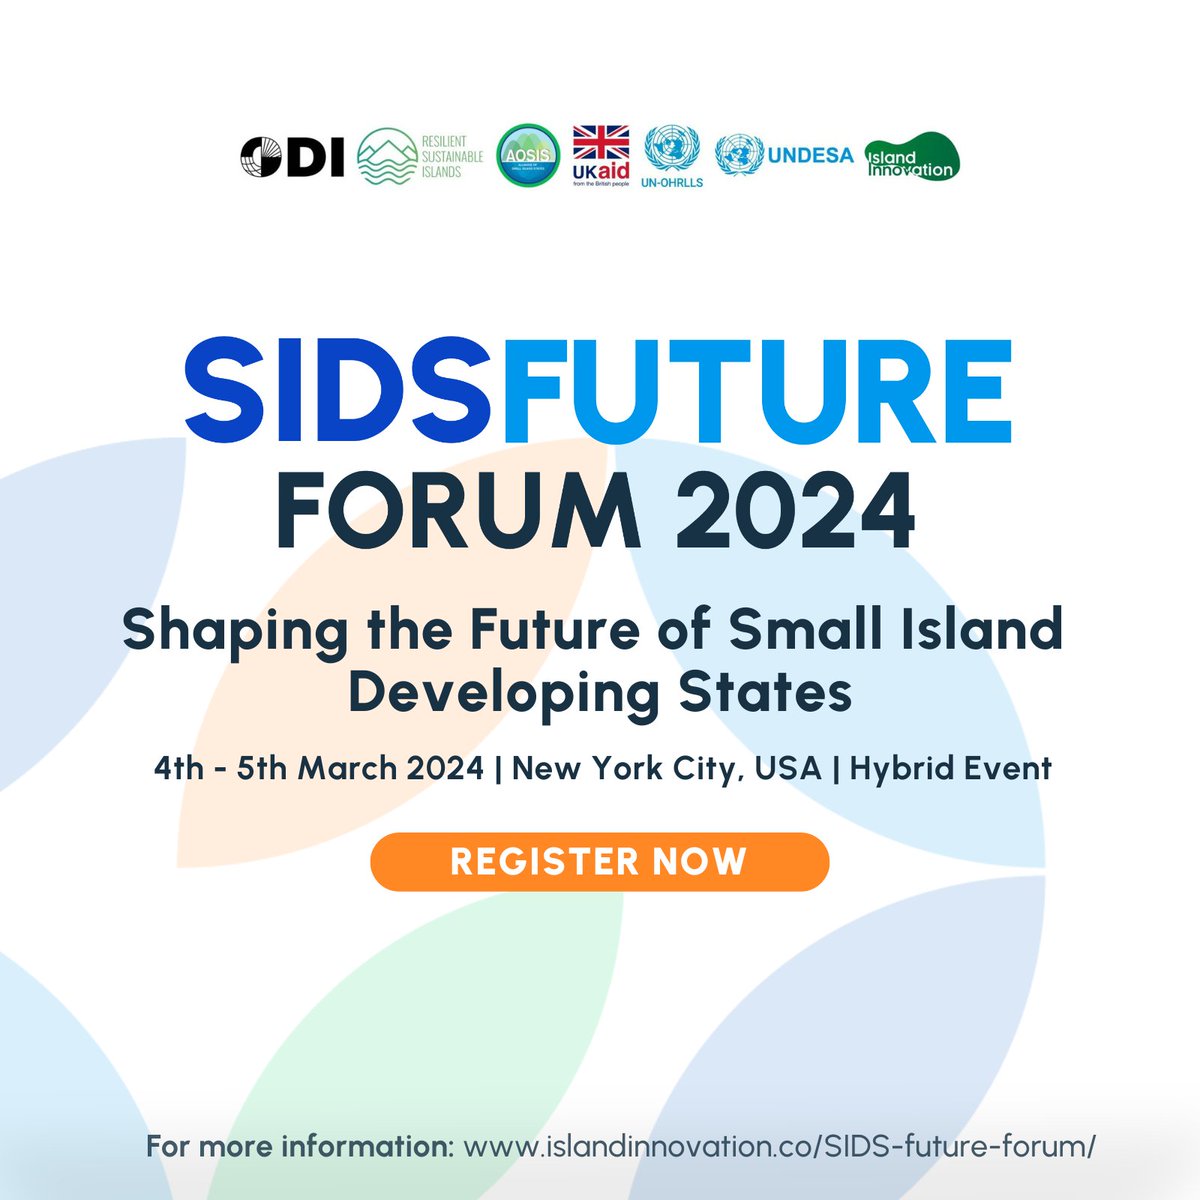 Held just before the #SIDS4 conference, the #SIDSFutureForum brings together policymakers, researchers, and YOU to co-create a resilient & sustainable future for Small Island Developing States 🌊 Register to attend Day 1 of the online event on 4th March: islandinnovation.co/events/sids-fu…